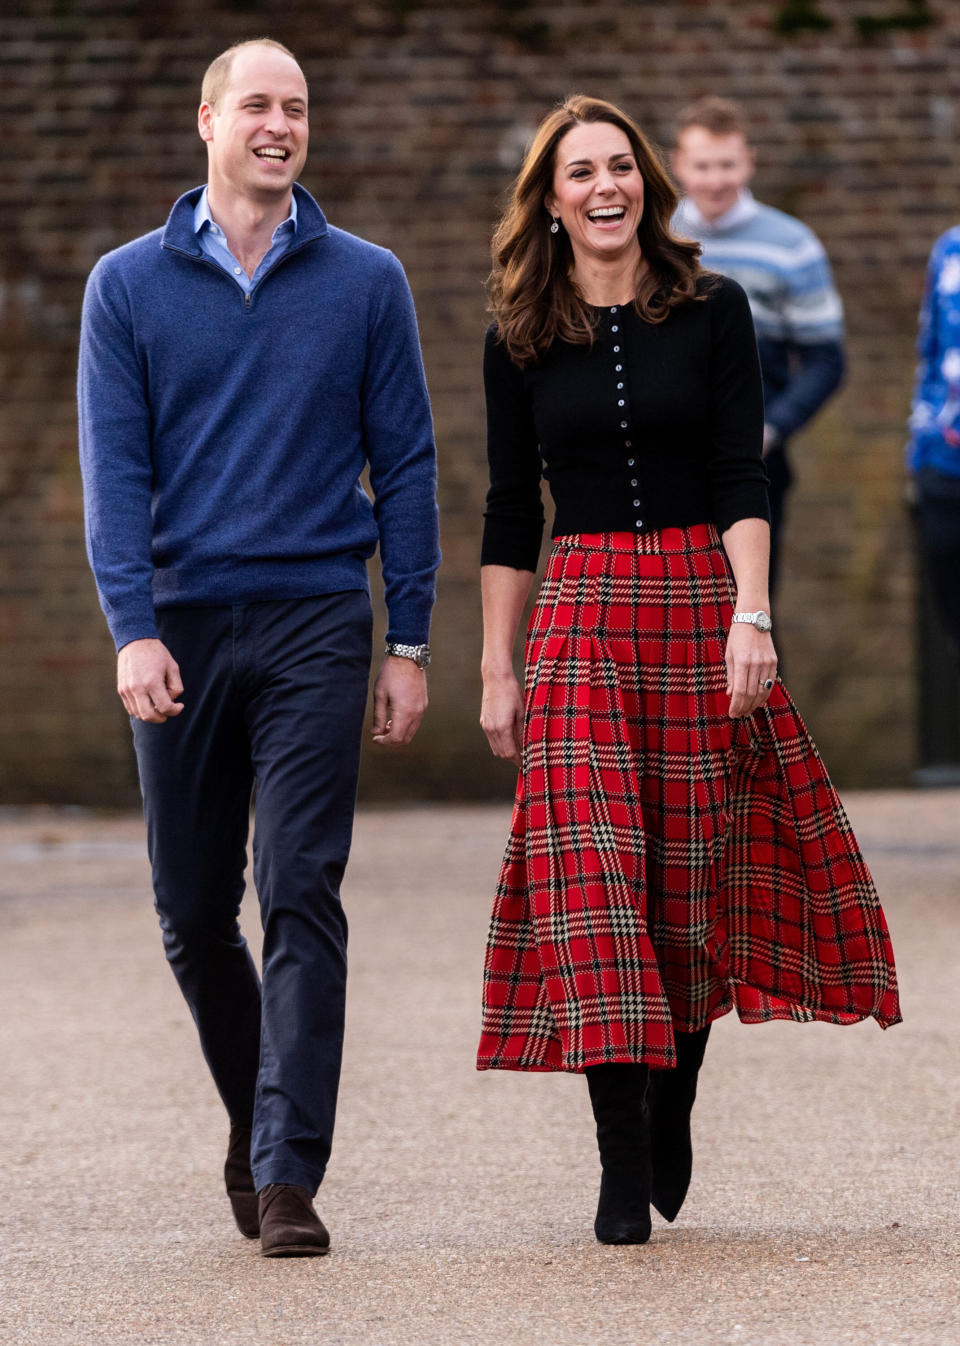 The Duke and Duchess of Cambridge attend a Christmas party Dec. 4 at Kensington Palace for families and children of deployed personnel from RAF Coningsby and RAF Marham serving in Cyprus.